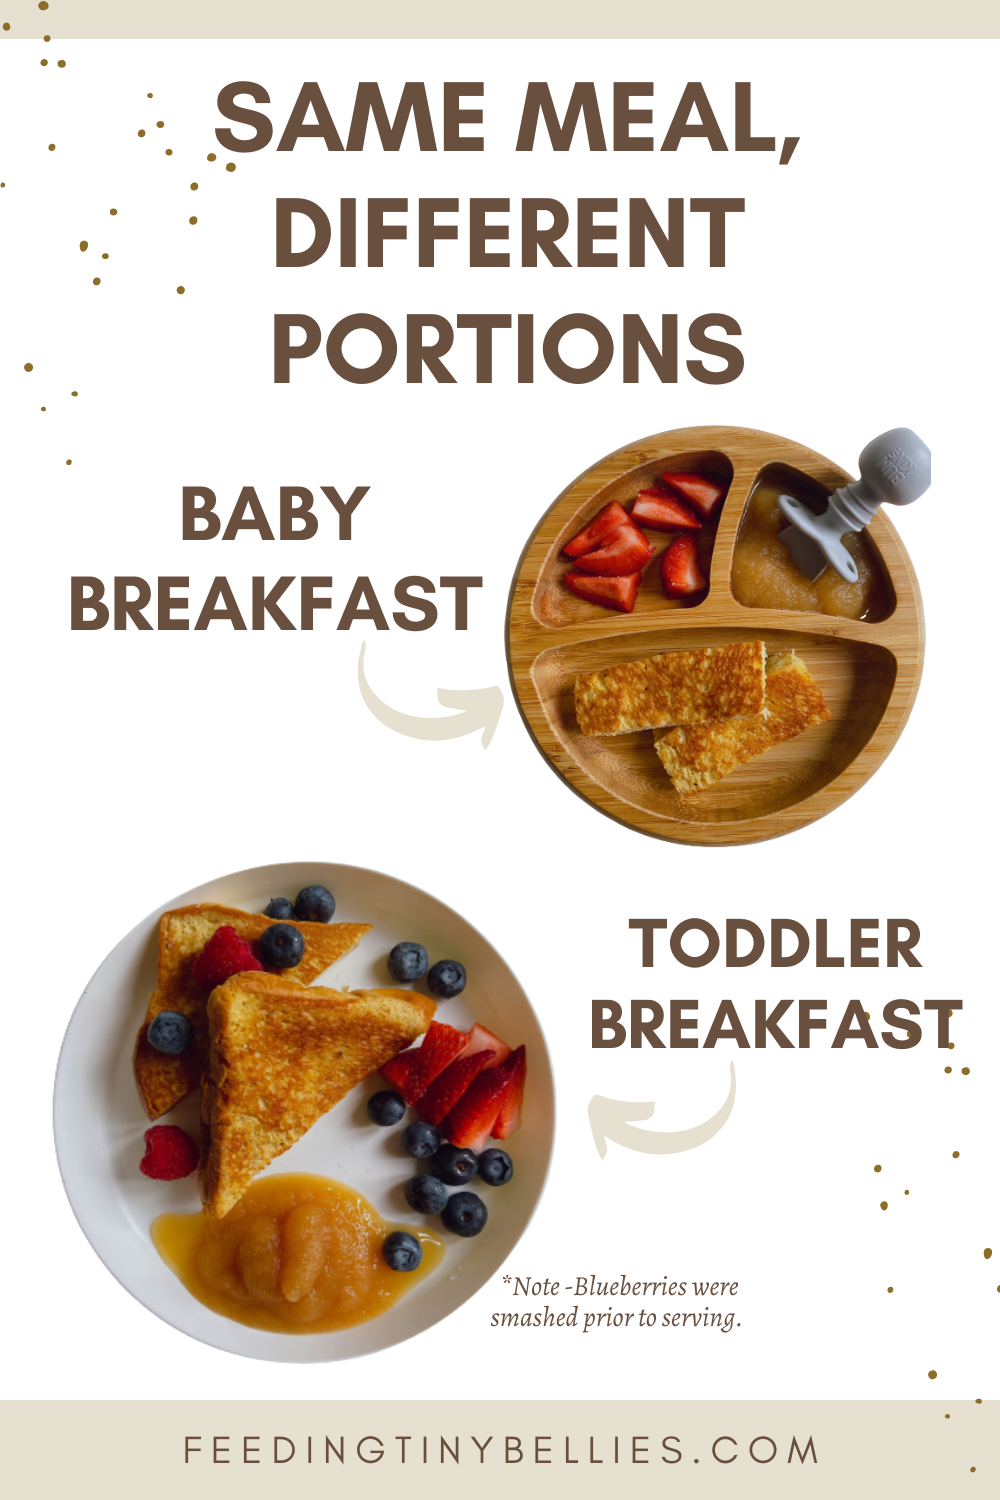 Same meal, different portions. Baby versus toddler breakfast